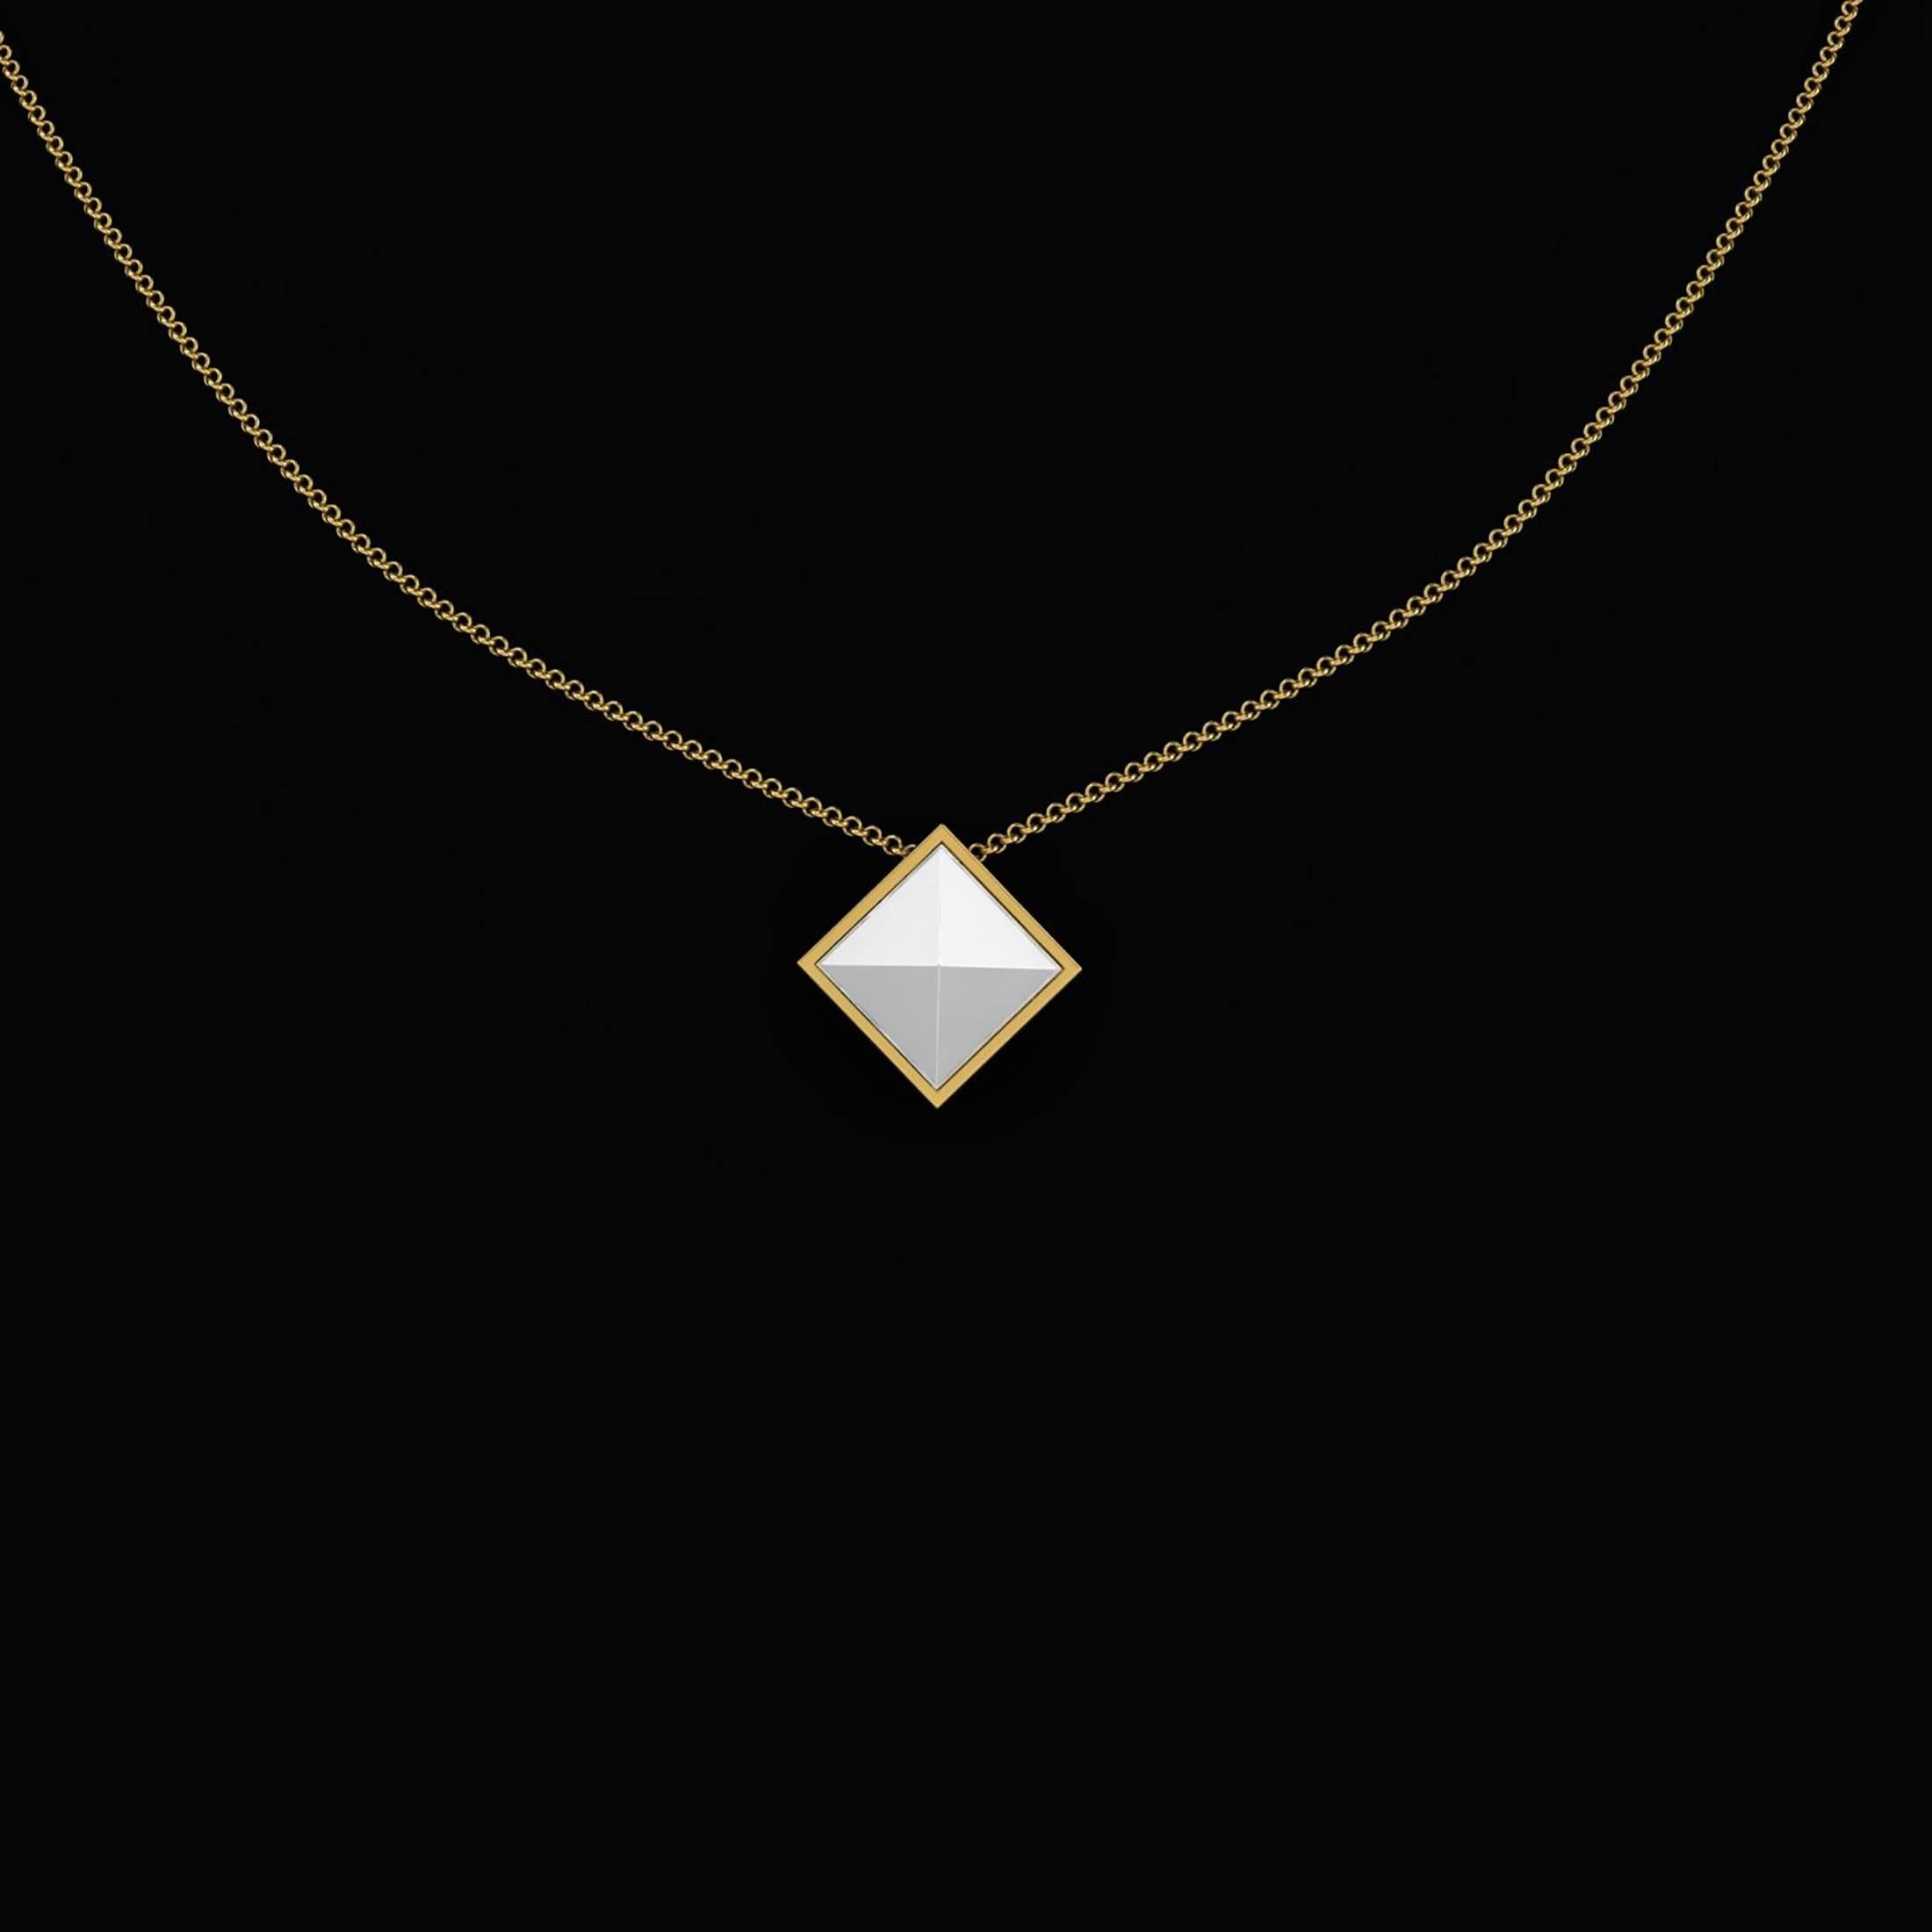 White agate Pyramid necklace pendant, set in 18k yellow gold necklace, hand made in New York by Italian designer Francesco Ferrucci,
the chain has the possibility to be closed at 16inches, 18 inches and 20inches based on your attire and